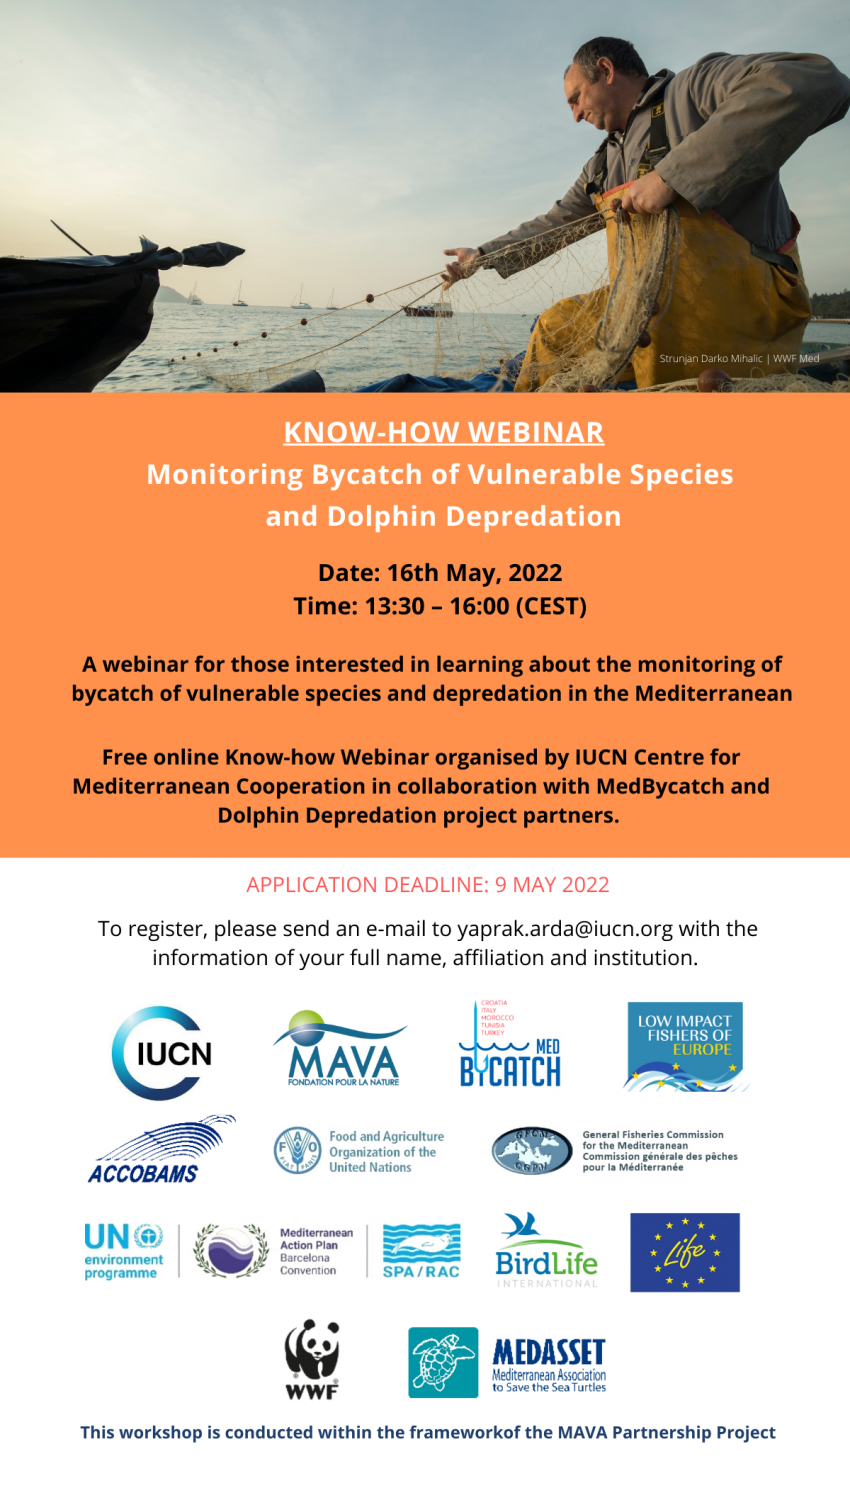 Webinar on monitoring of bycatch and dolphin depredation